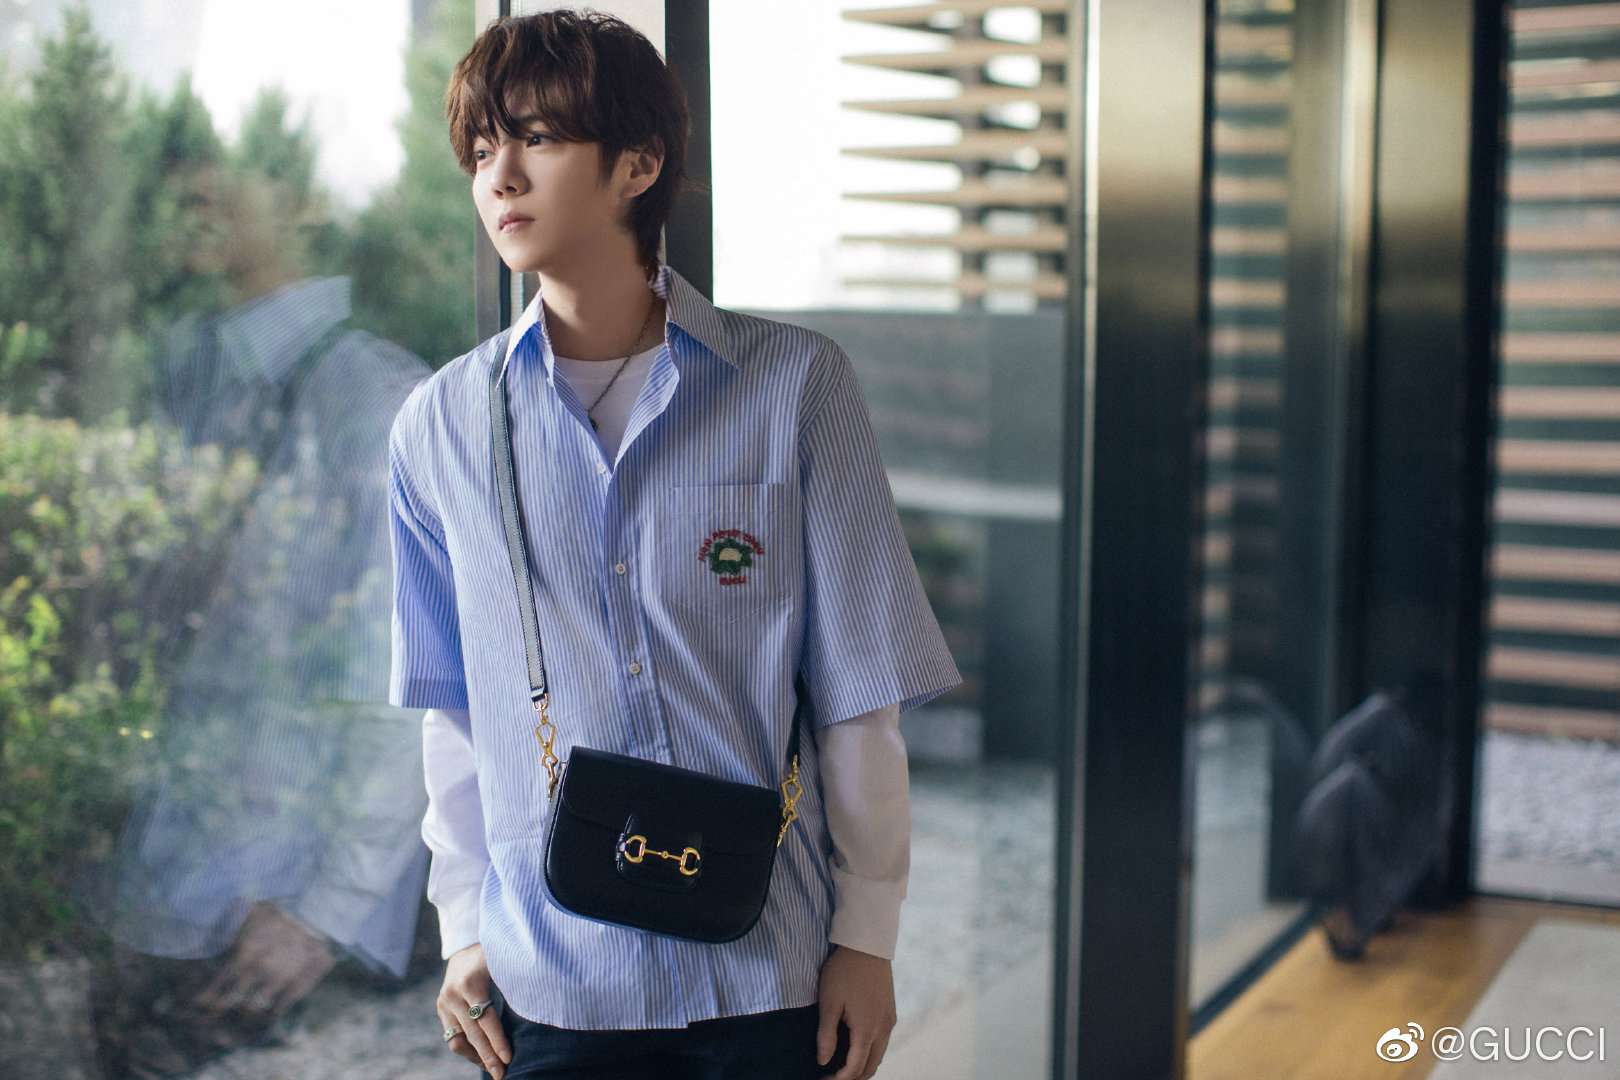 LuHan International on X: [PICTURE] 210324 GUCCI's Weibo updates: With the  spring freshness, GUCCI's Brand Ambassador #LuHan carries Gucci Horsebit  1955 mini bag in refreshing outfit, brings you comfort and freedom with